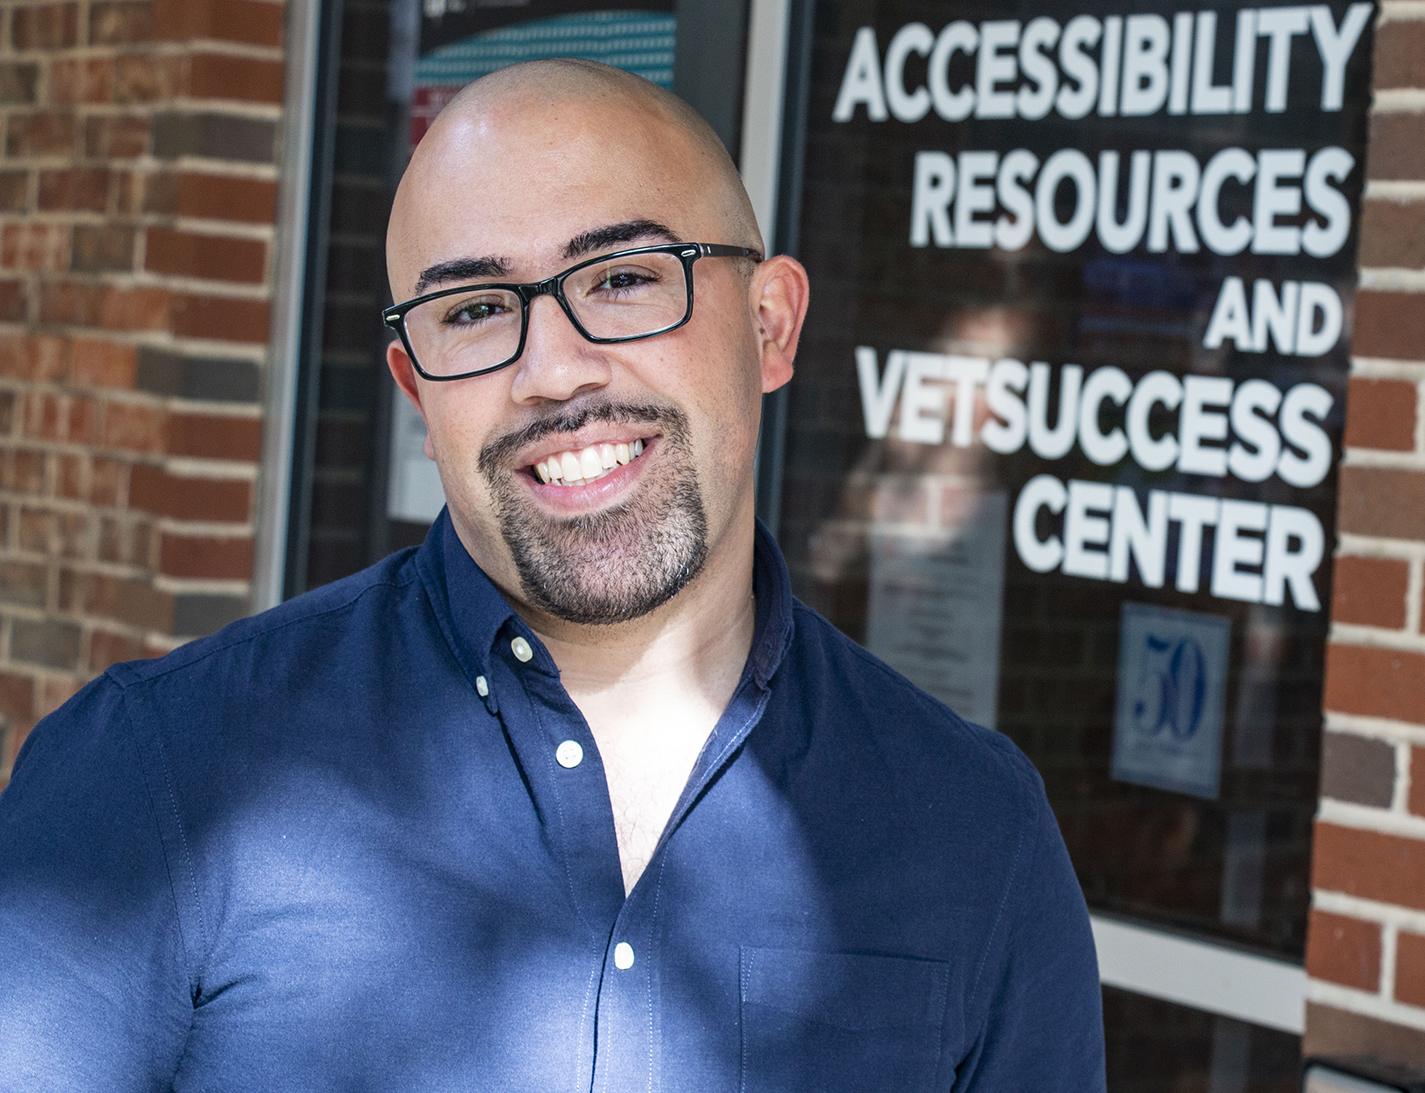 Veteran success assistant Abdel Casiano went from sailor, detention officer to college student with the assistance from the VetSuccess center on South Campus.